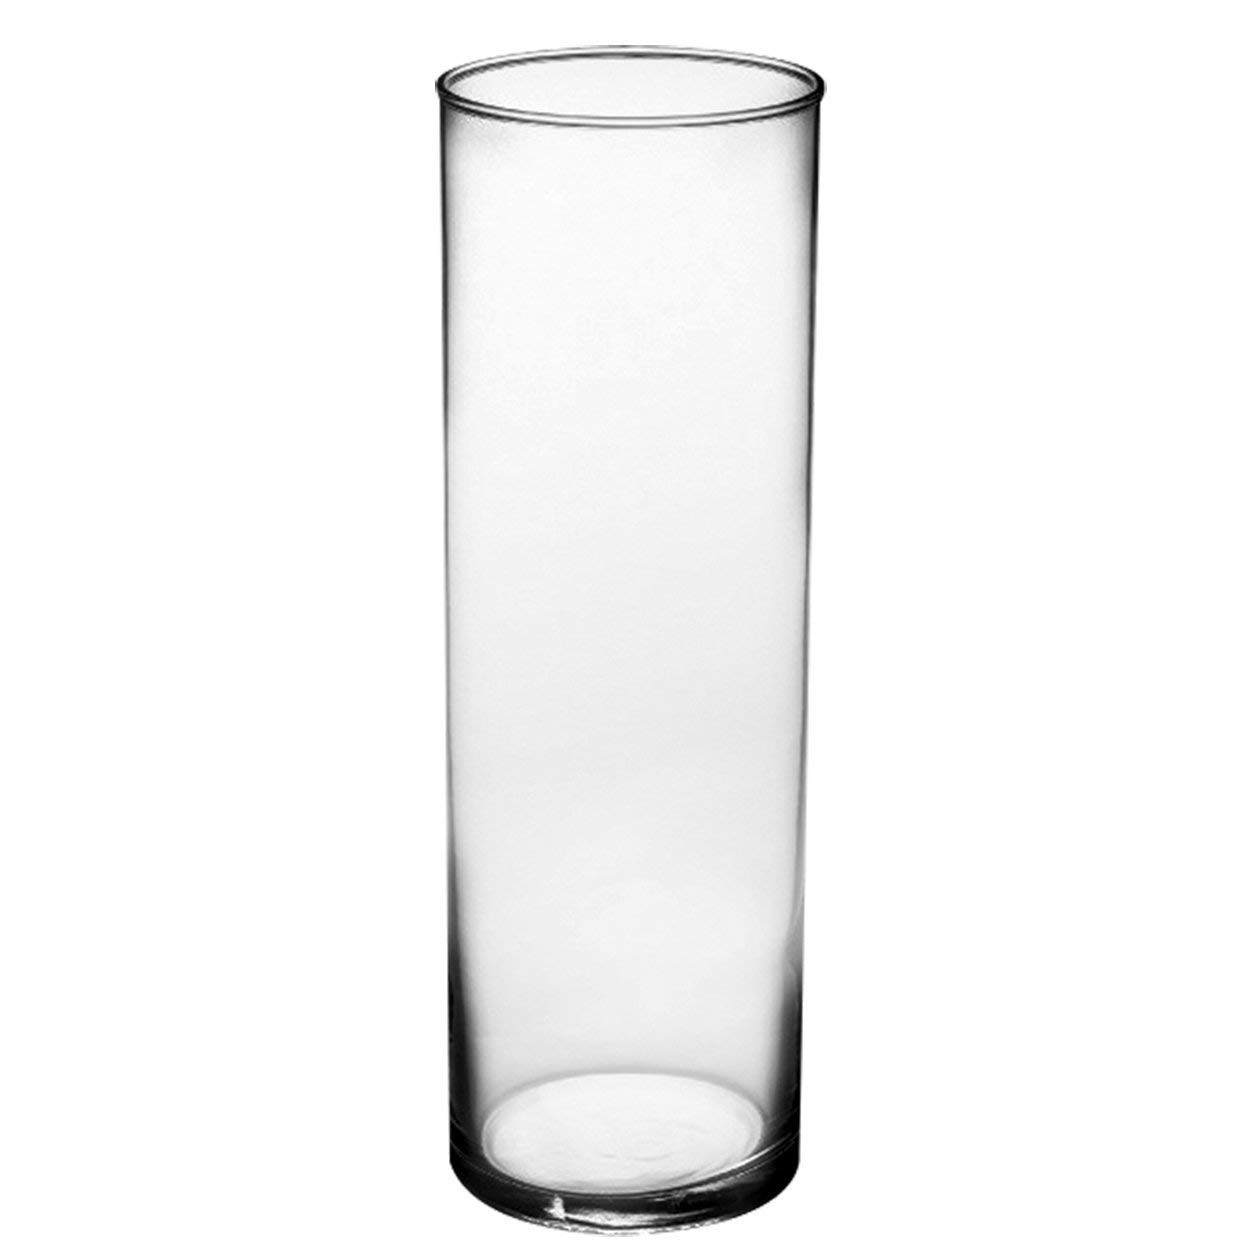 13 Great Clear Glass Vases for Sale 2024 free download clear glass vases for sale of amazon com syndicate sales 3 1 2 x 10 1 2 cylinder vase clear with amazon com syndicate sales 3 1 2 x 10 1 2 cylinder vase clear planters garden outdoor